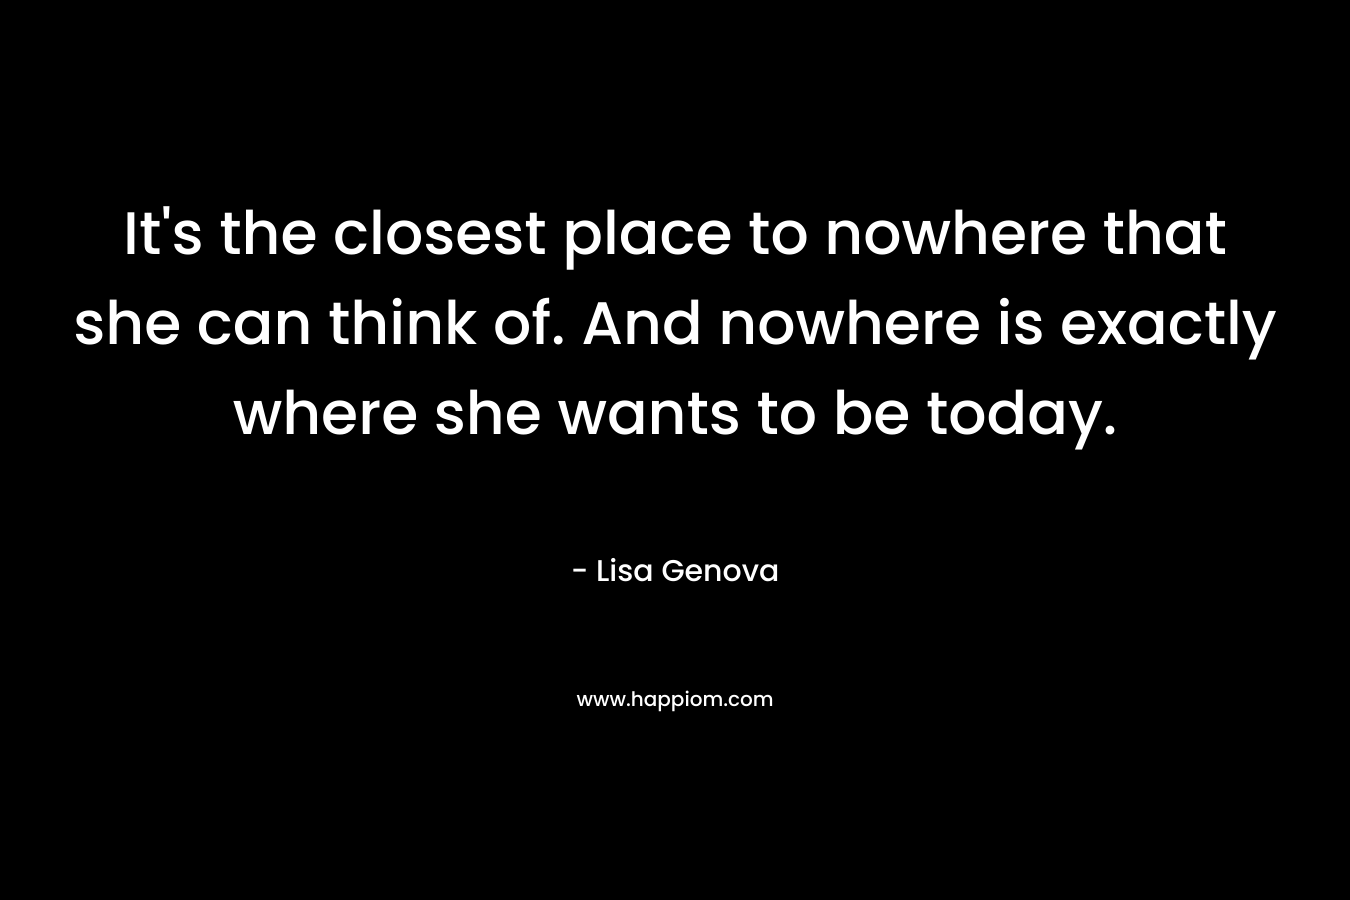 It’s the closest place to nowhere that she can think of. And nowhere is exactly where she wants to be today. – Lisa Genova